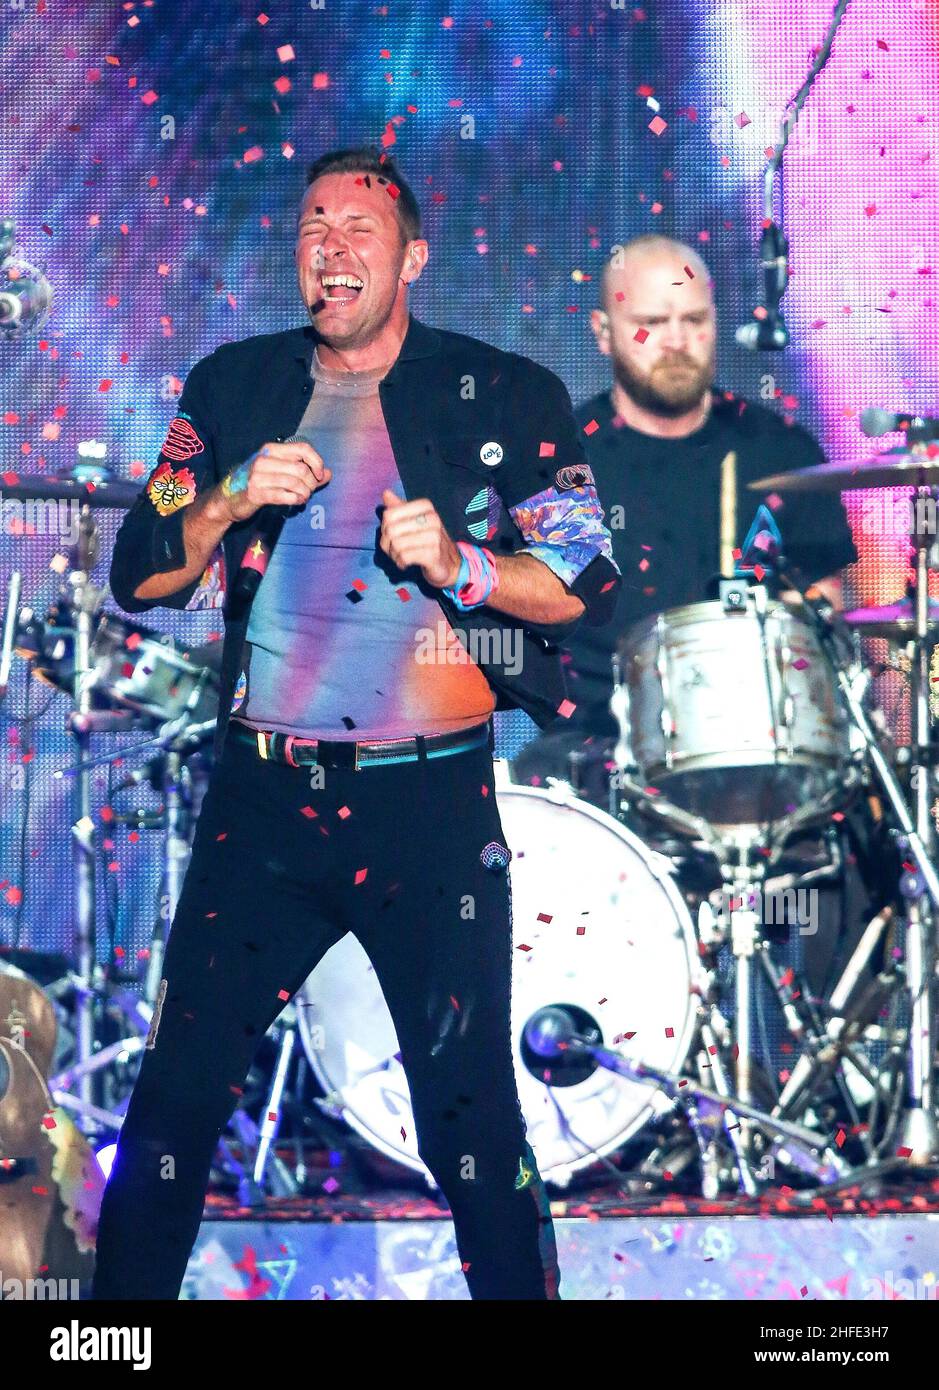 Happy Birthday 𝐖𝐢𝐥𝐥 𝐂𝐡𝐚𝐦𝐩𝐢𝐨𝐧 Band: Coldplay Age: 42